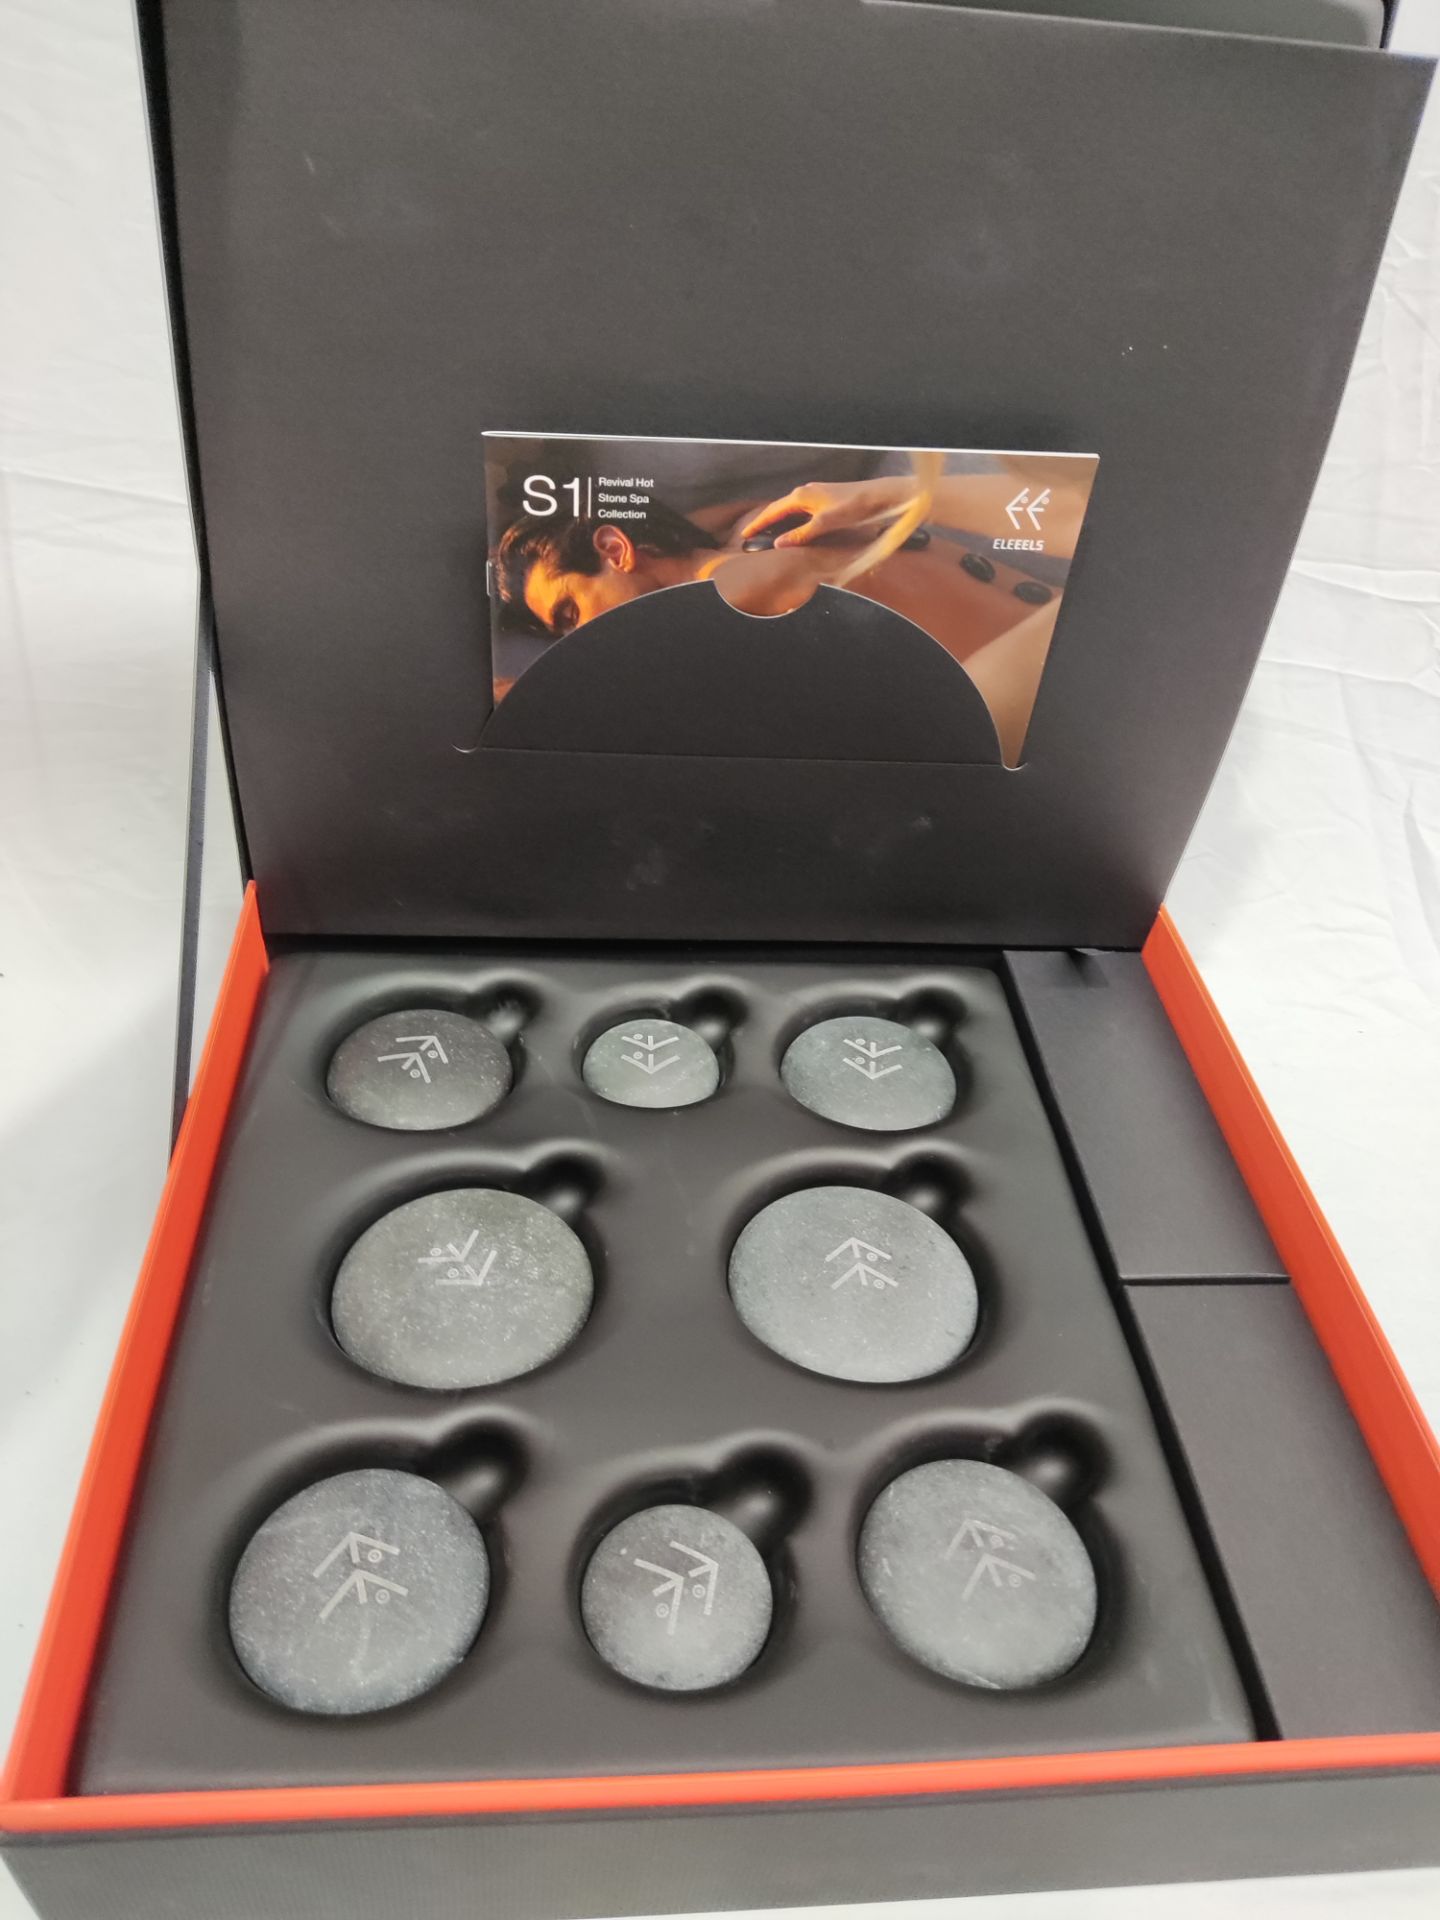 1 x ELEEELS Eleeels S1 Revival Hot Stone Spa Collection - New/Boxed - Original RRP £349 - Ref: - Image 5 of 16